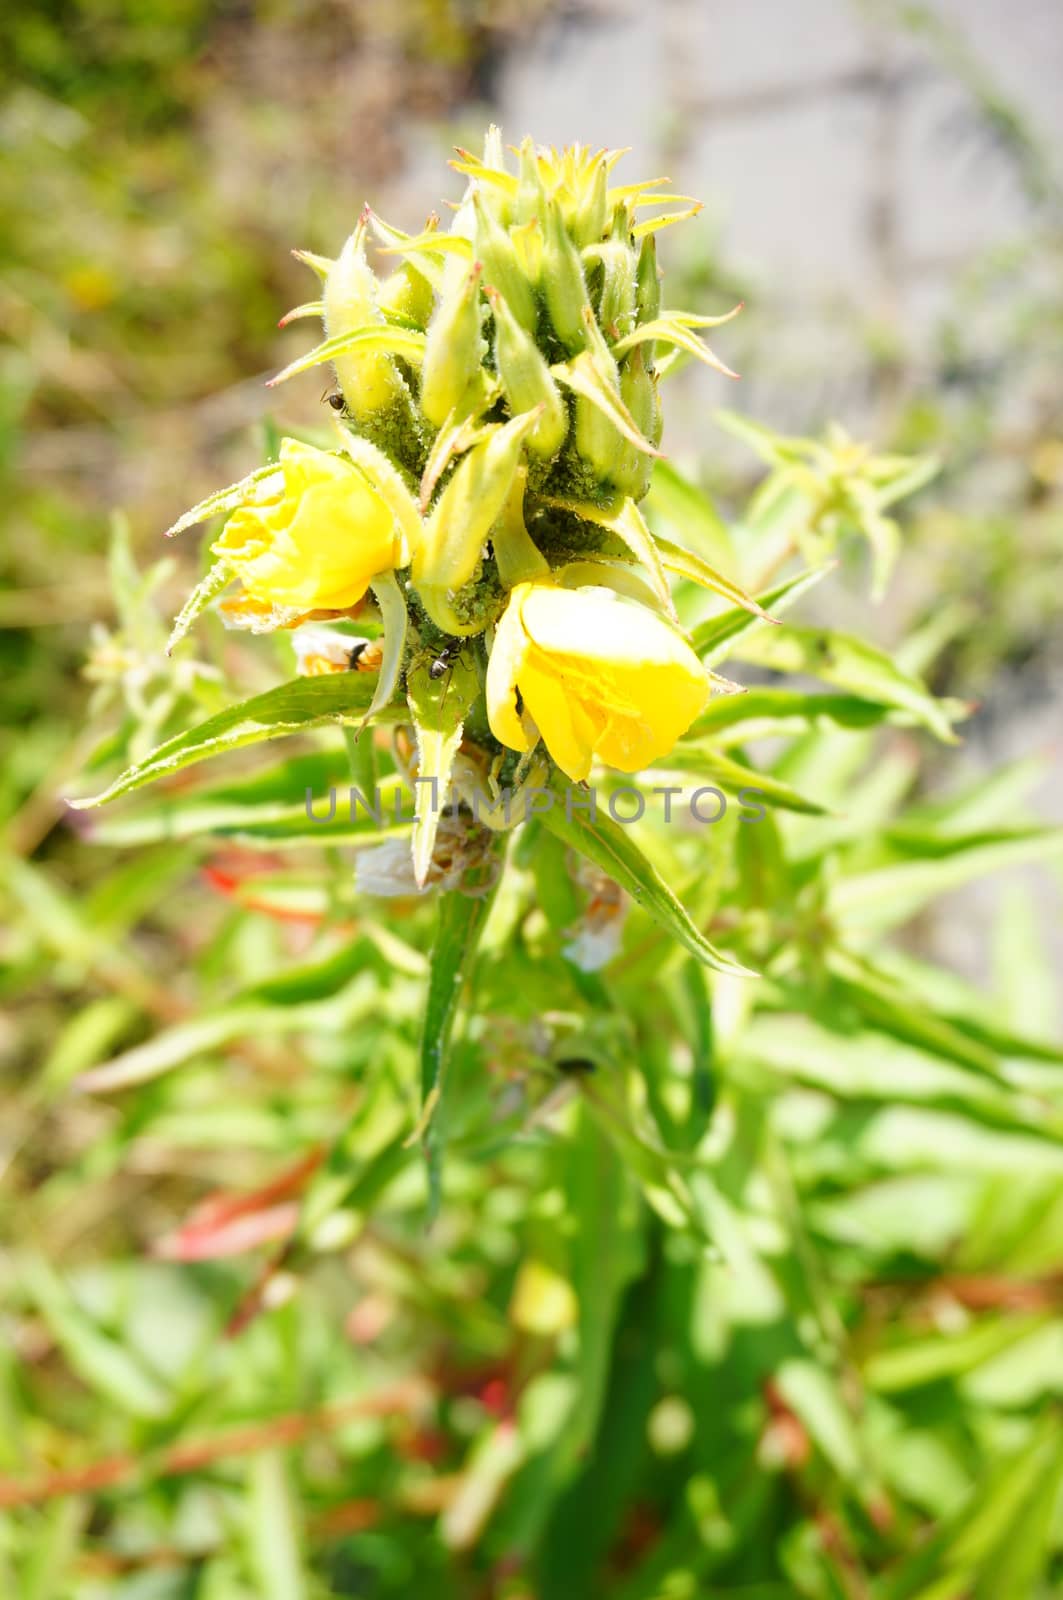 Green plant with yellow flower